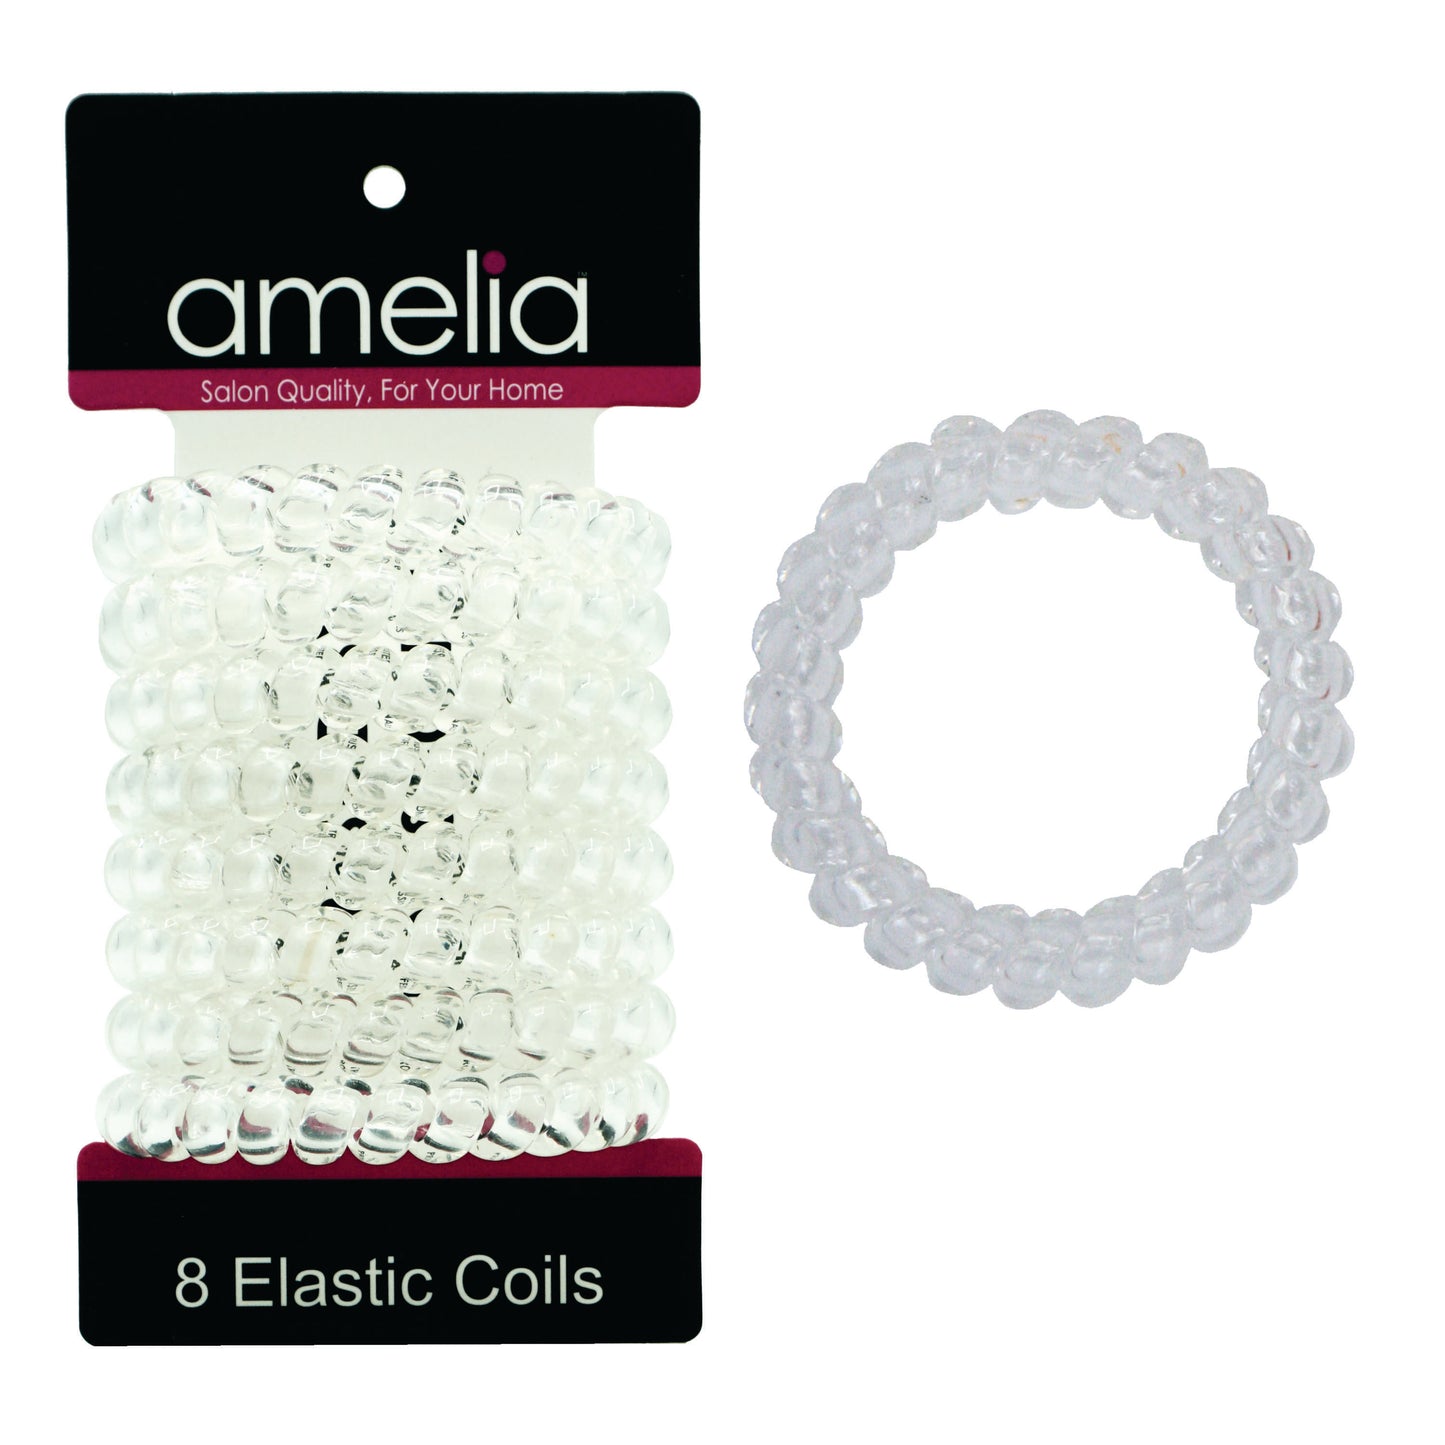 Amelia Beauty Products 8 Large Smooth Elastic Hair Coils, 2. 5in Diameter Thick Spiral Hair Ties, Gentle on Hair, Strong Hold and Minimizes Dents and Creases, Clear